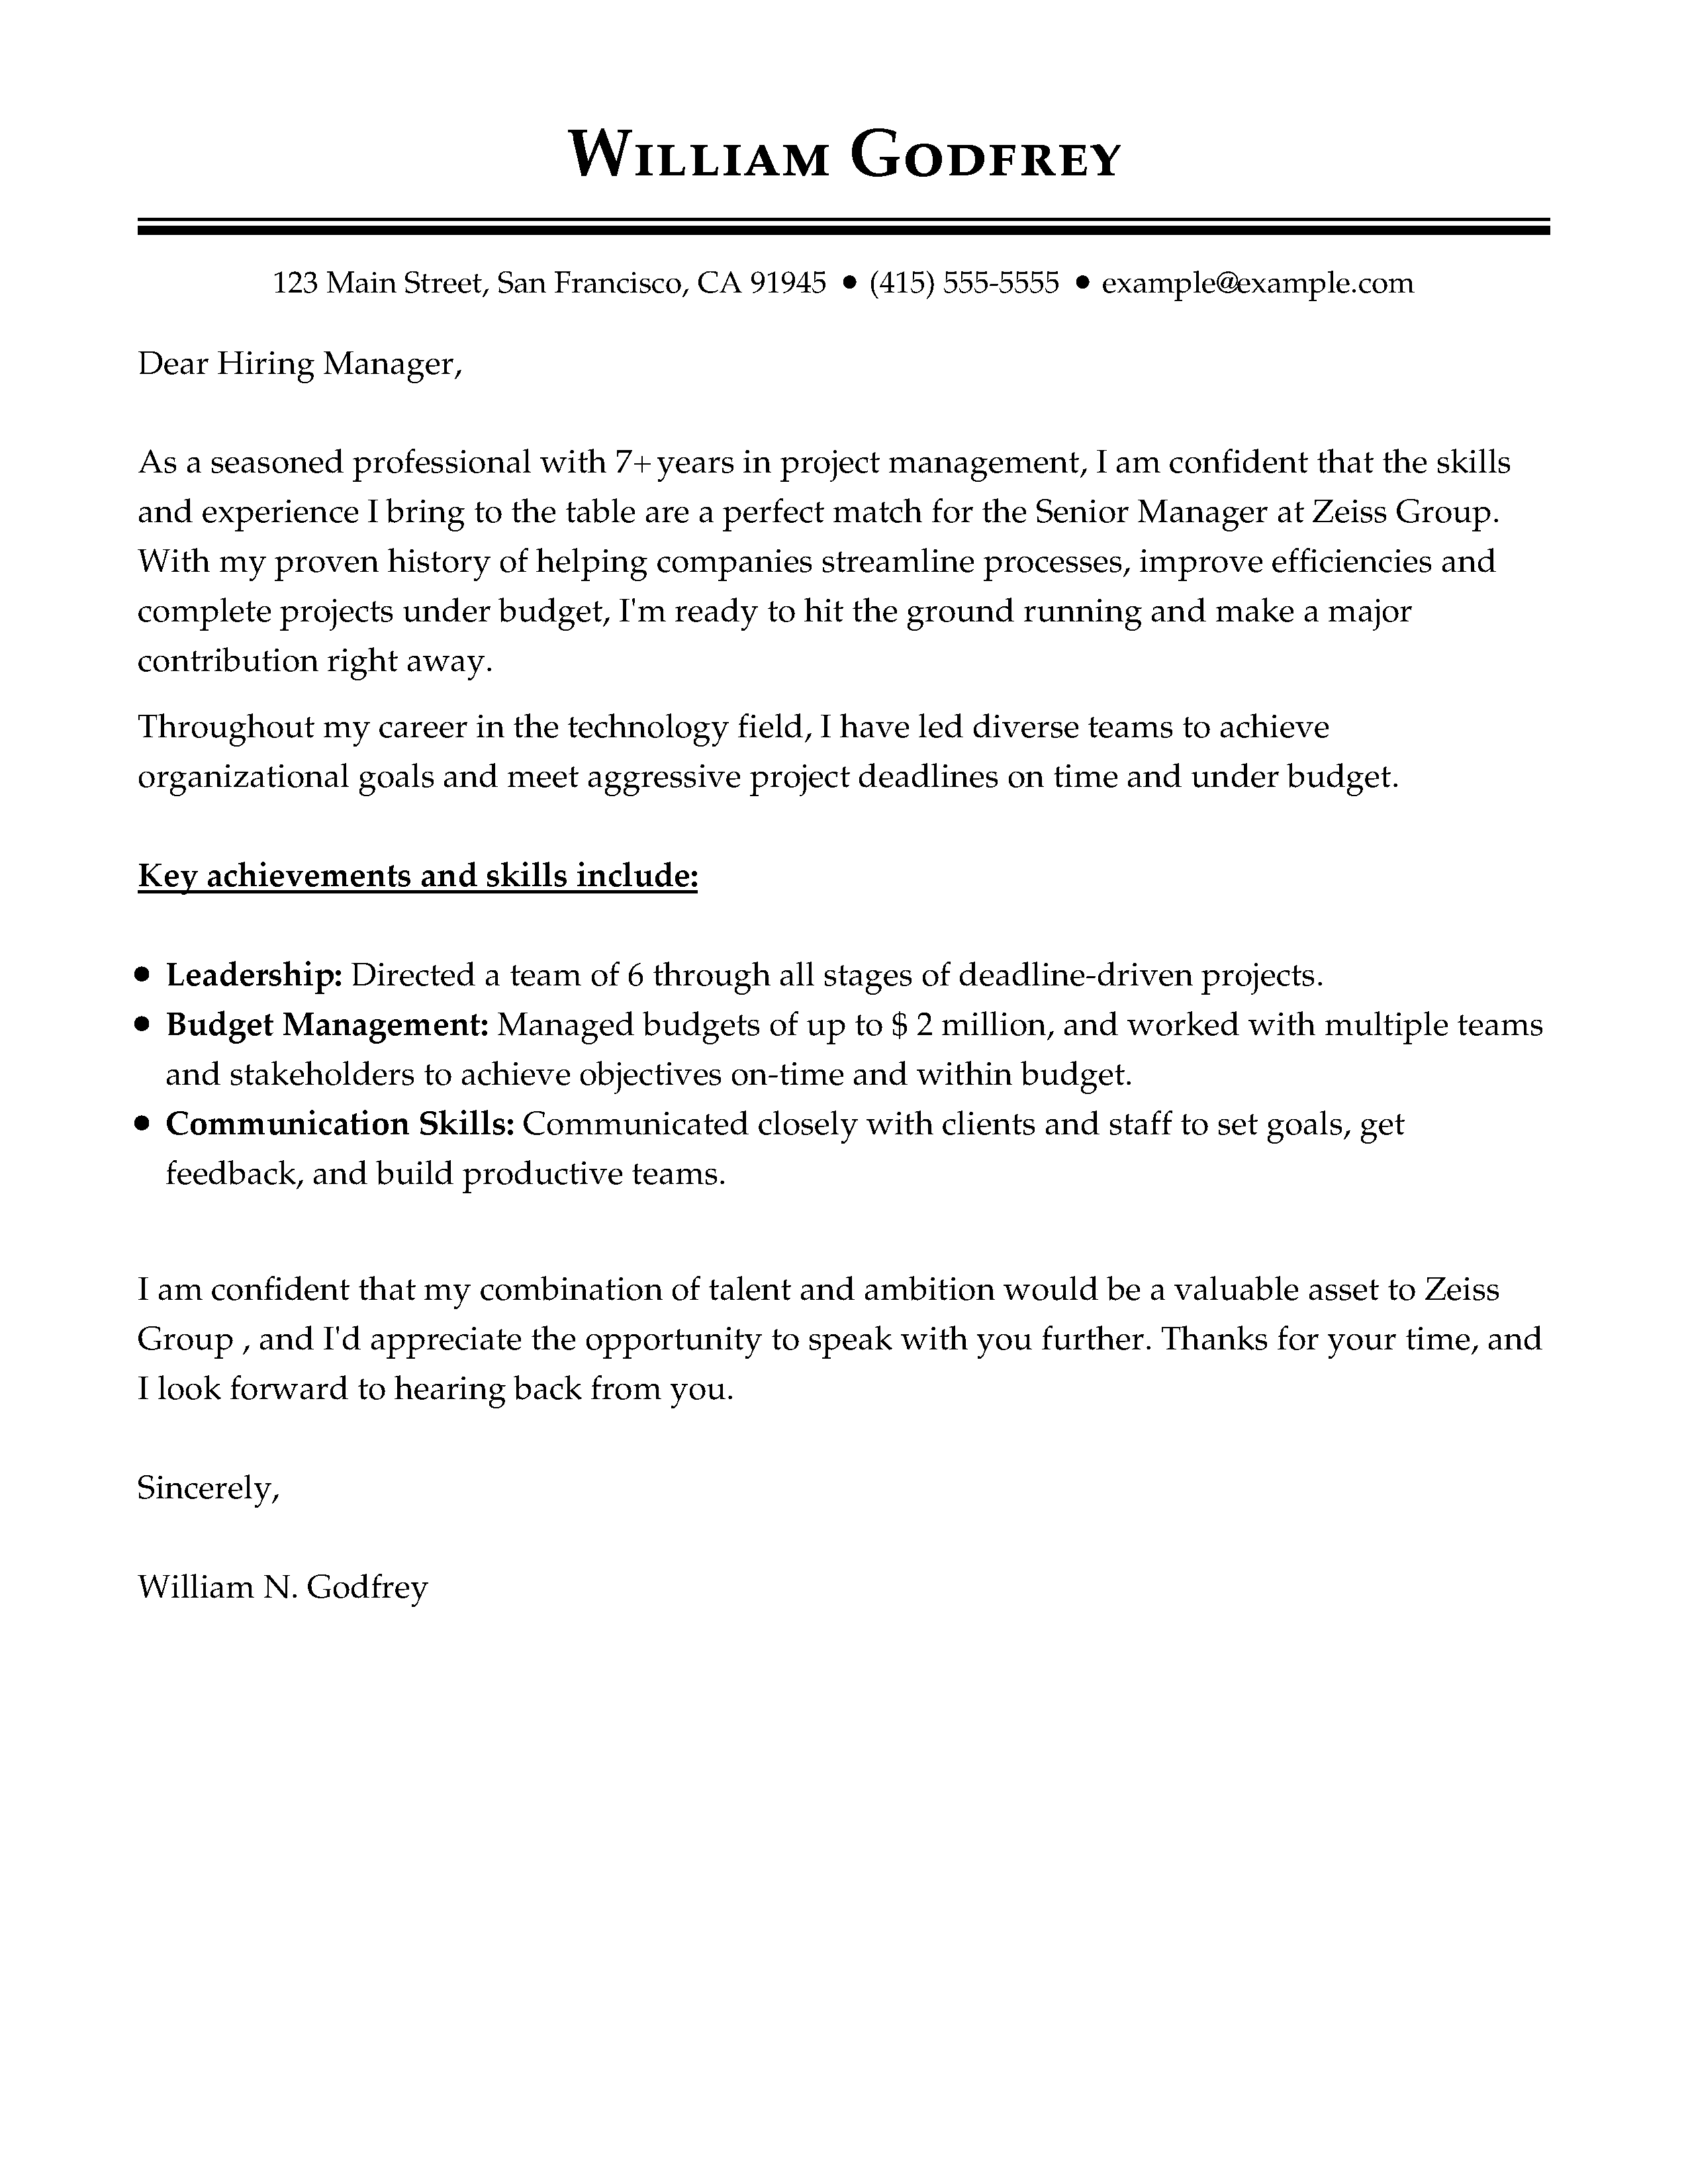 executive summary cover letter sample